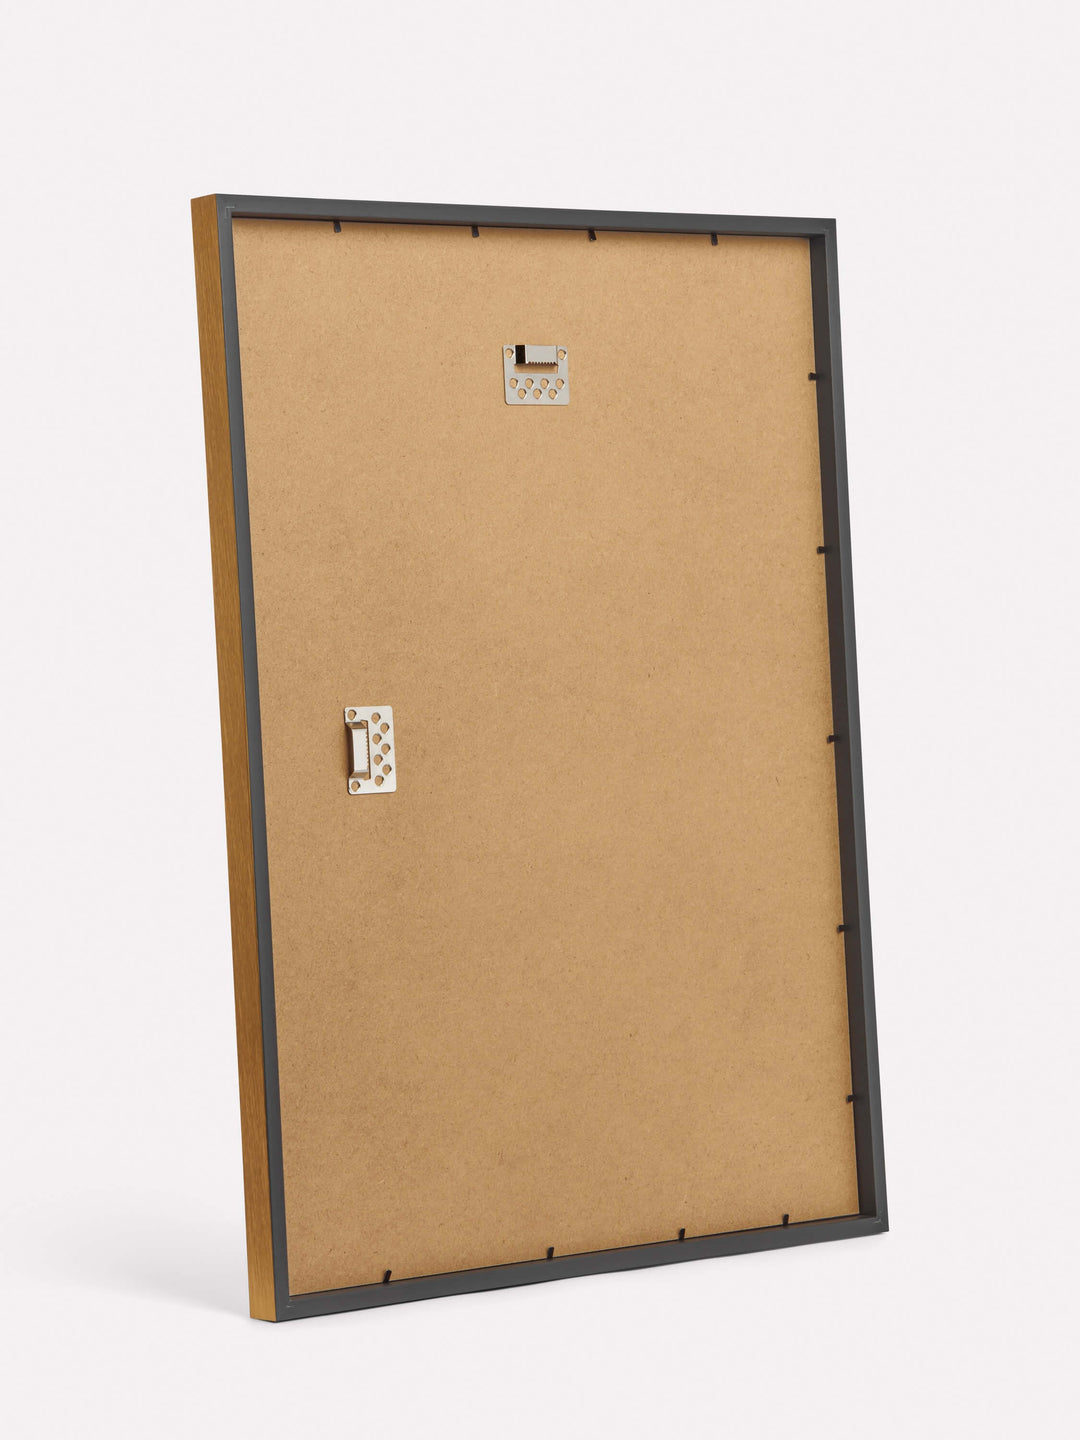 18x24-inch Classic Frame, Gold - Back view